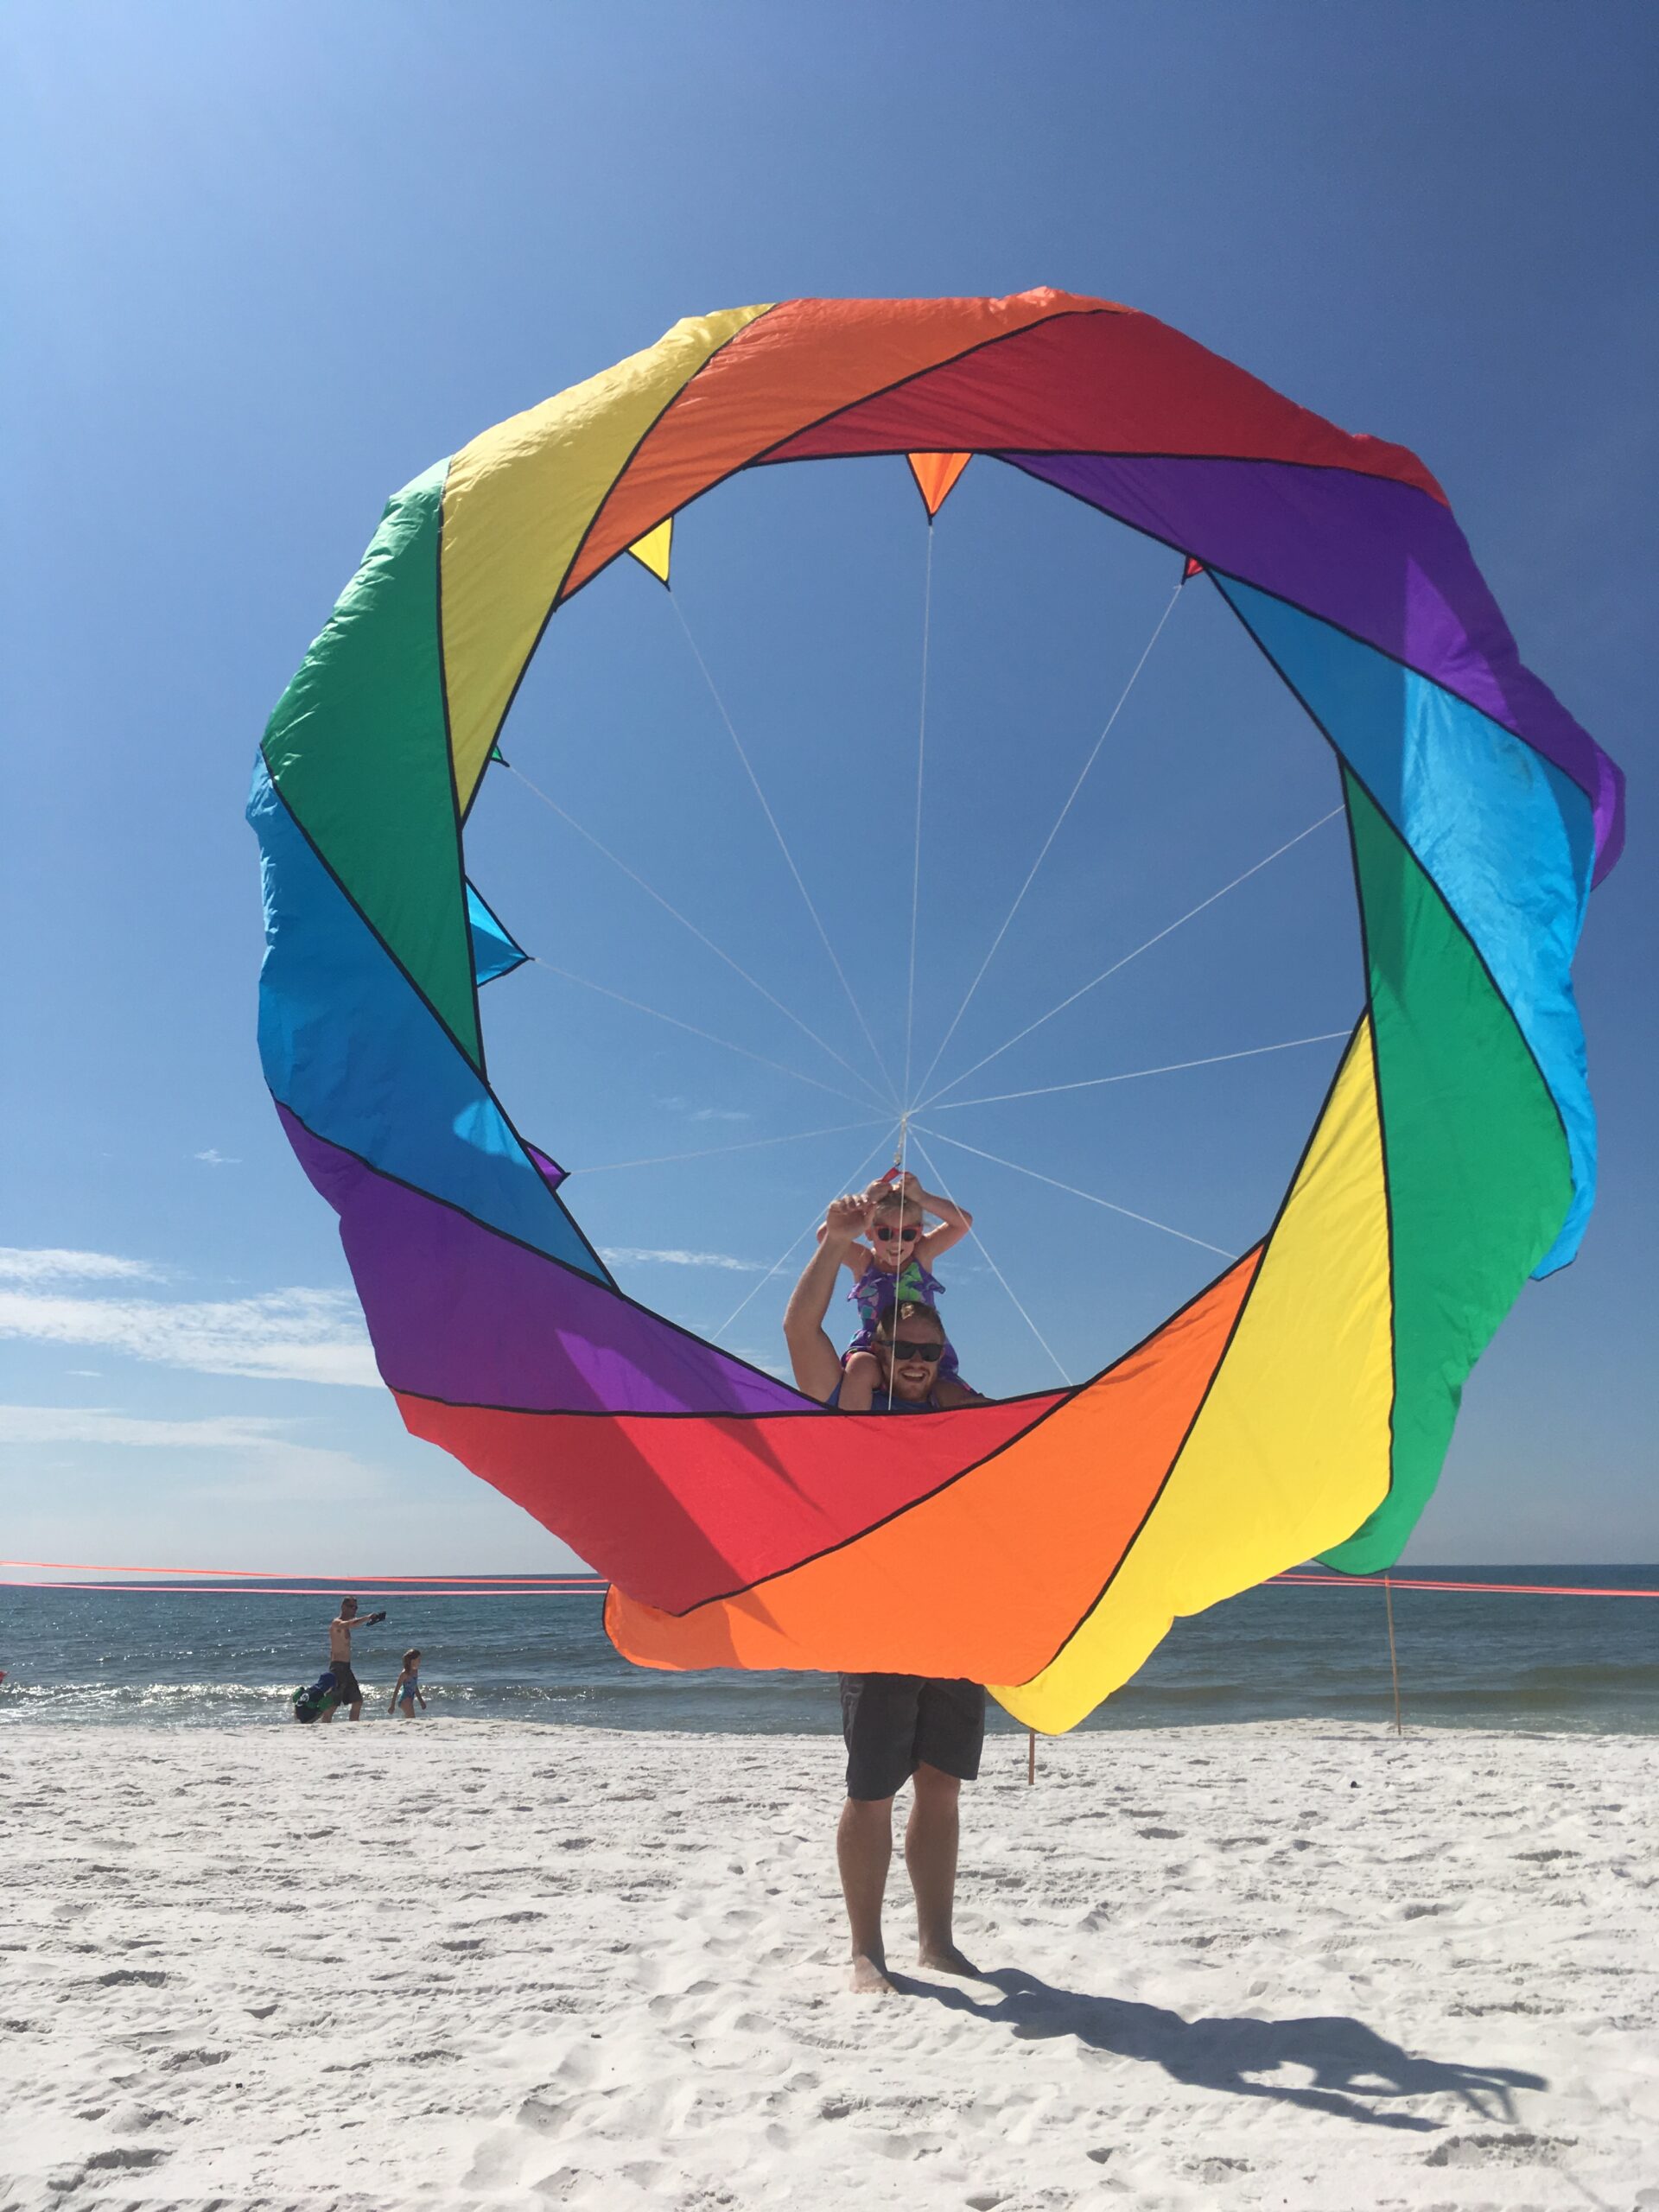 Kite Flying on the beaches of the Outer Banks